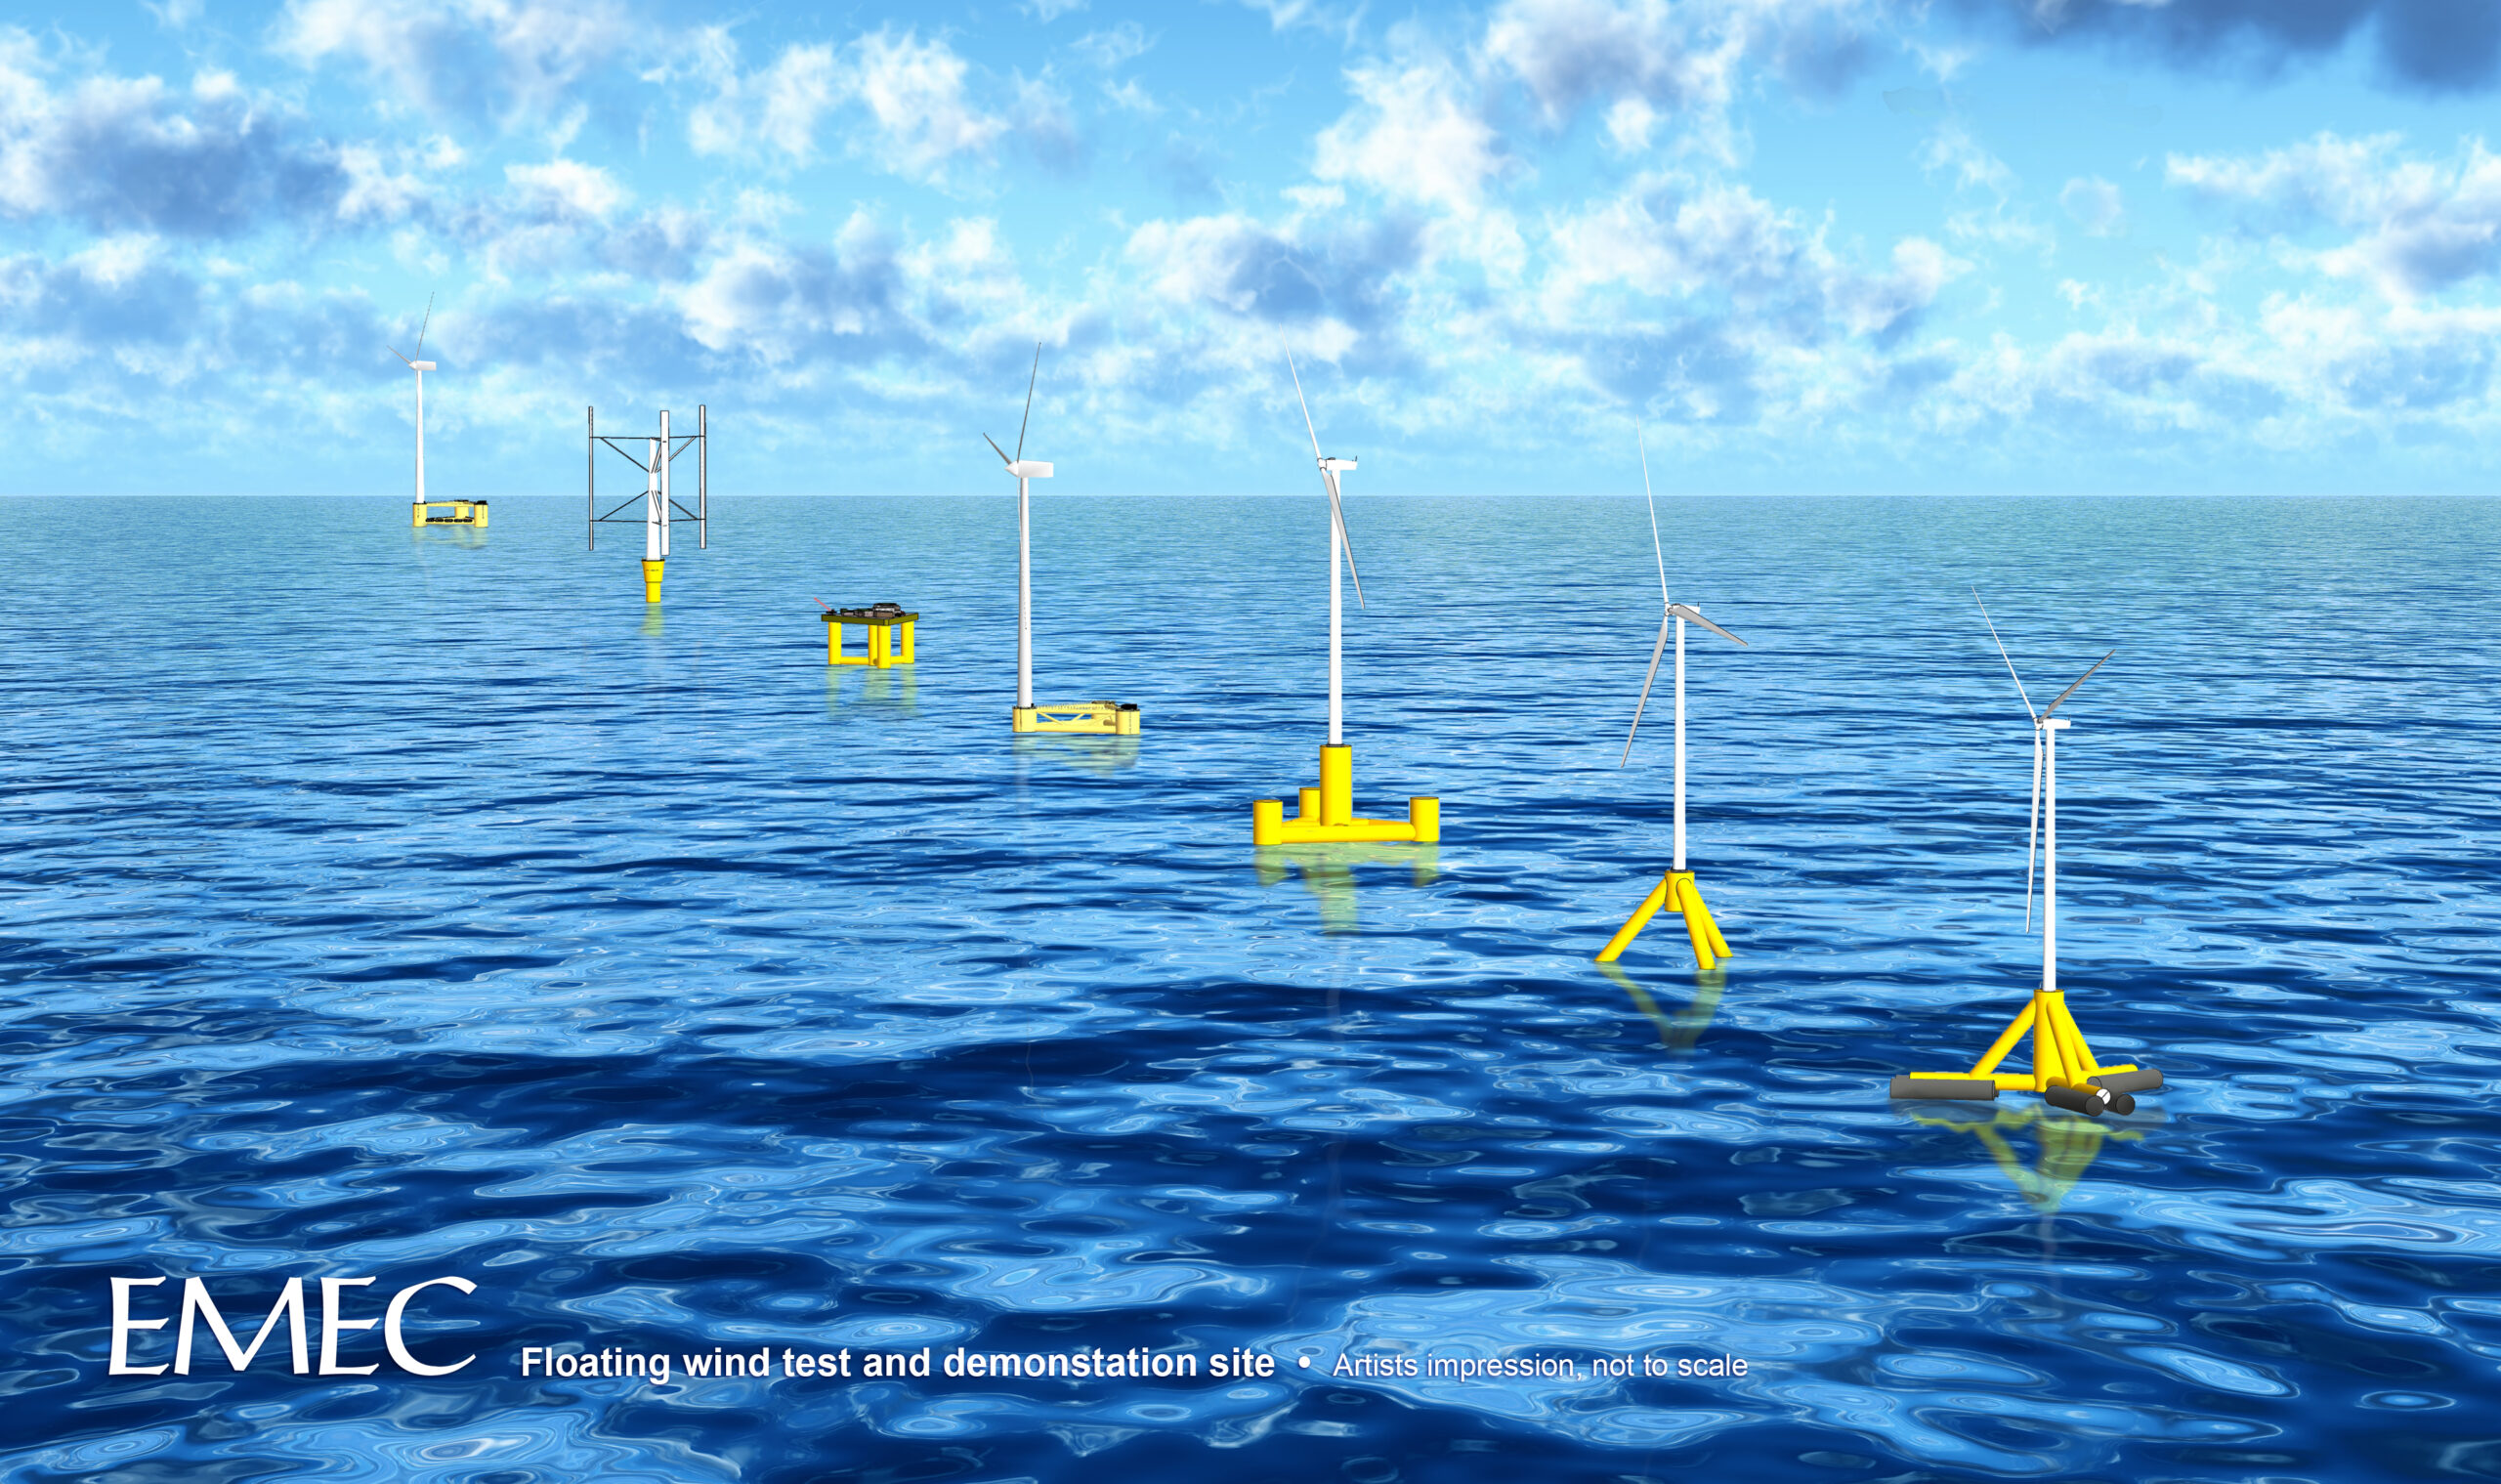 MEMBER NEWS: EMEC floating wind demo site offers £690 million opportunity to UK